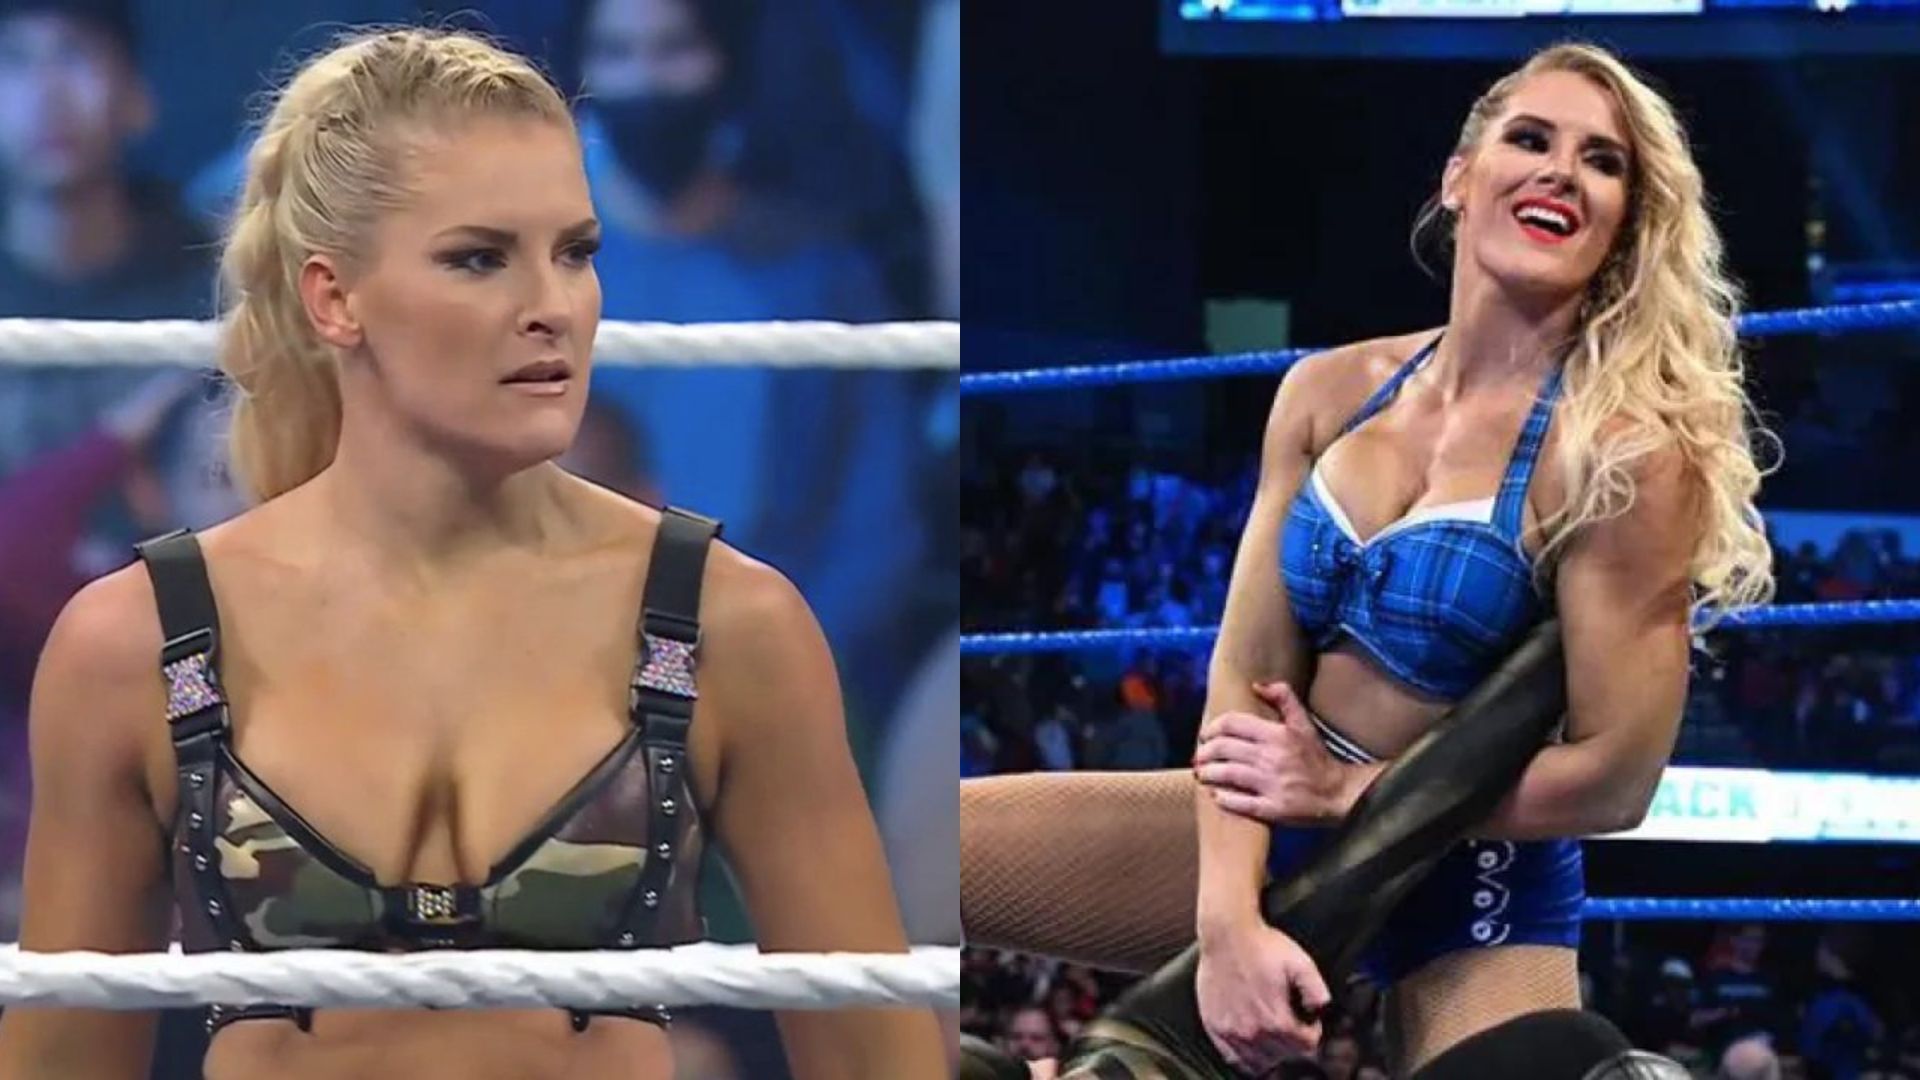 Lacey Evans sent a message ahead of SmackDown